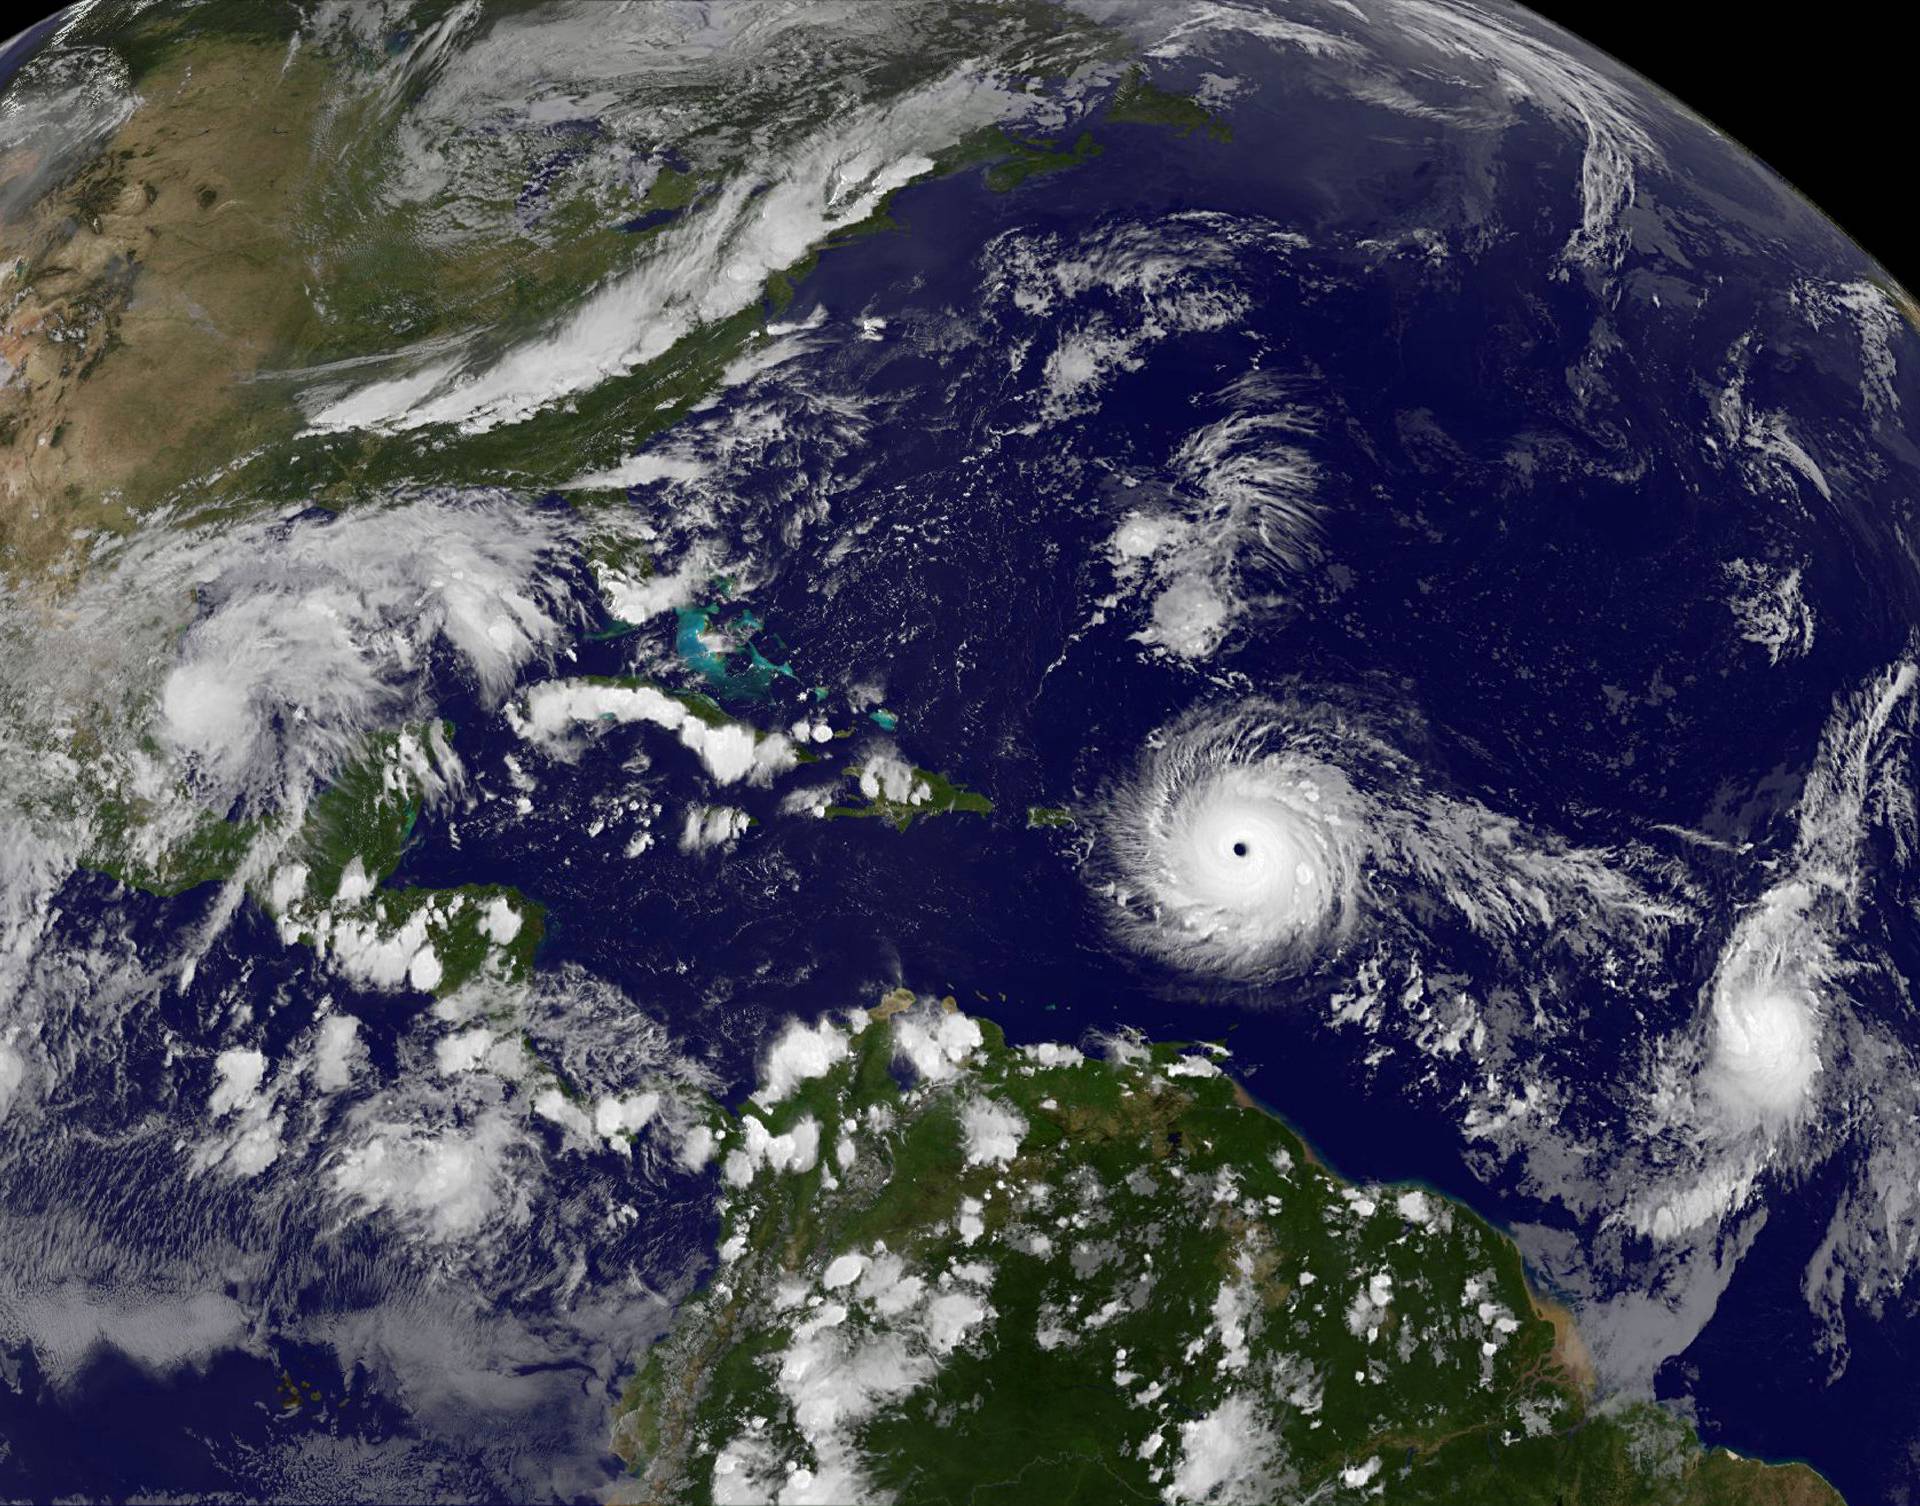 Hurricane Irma a record Category 5 storm churns across the Atlantic Ocean on a collision course with Puerto Rico and the Virgin Islands